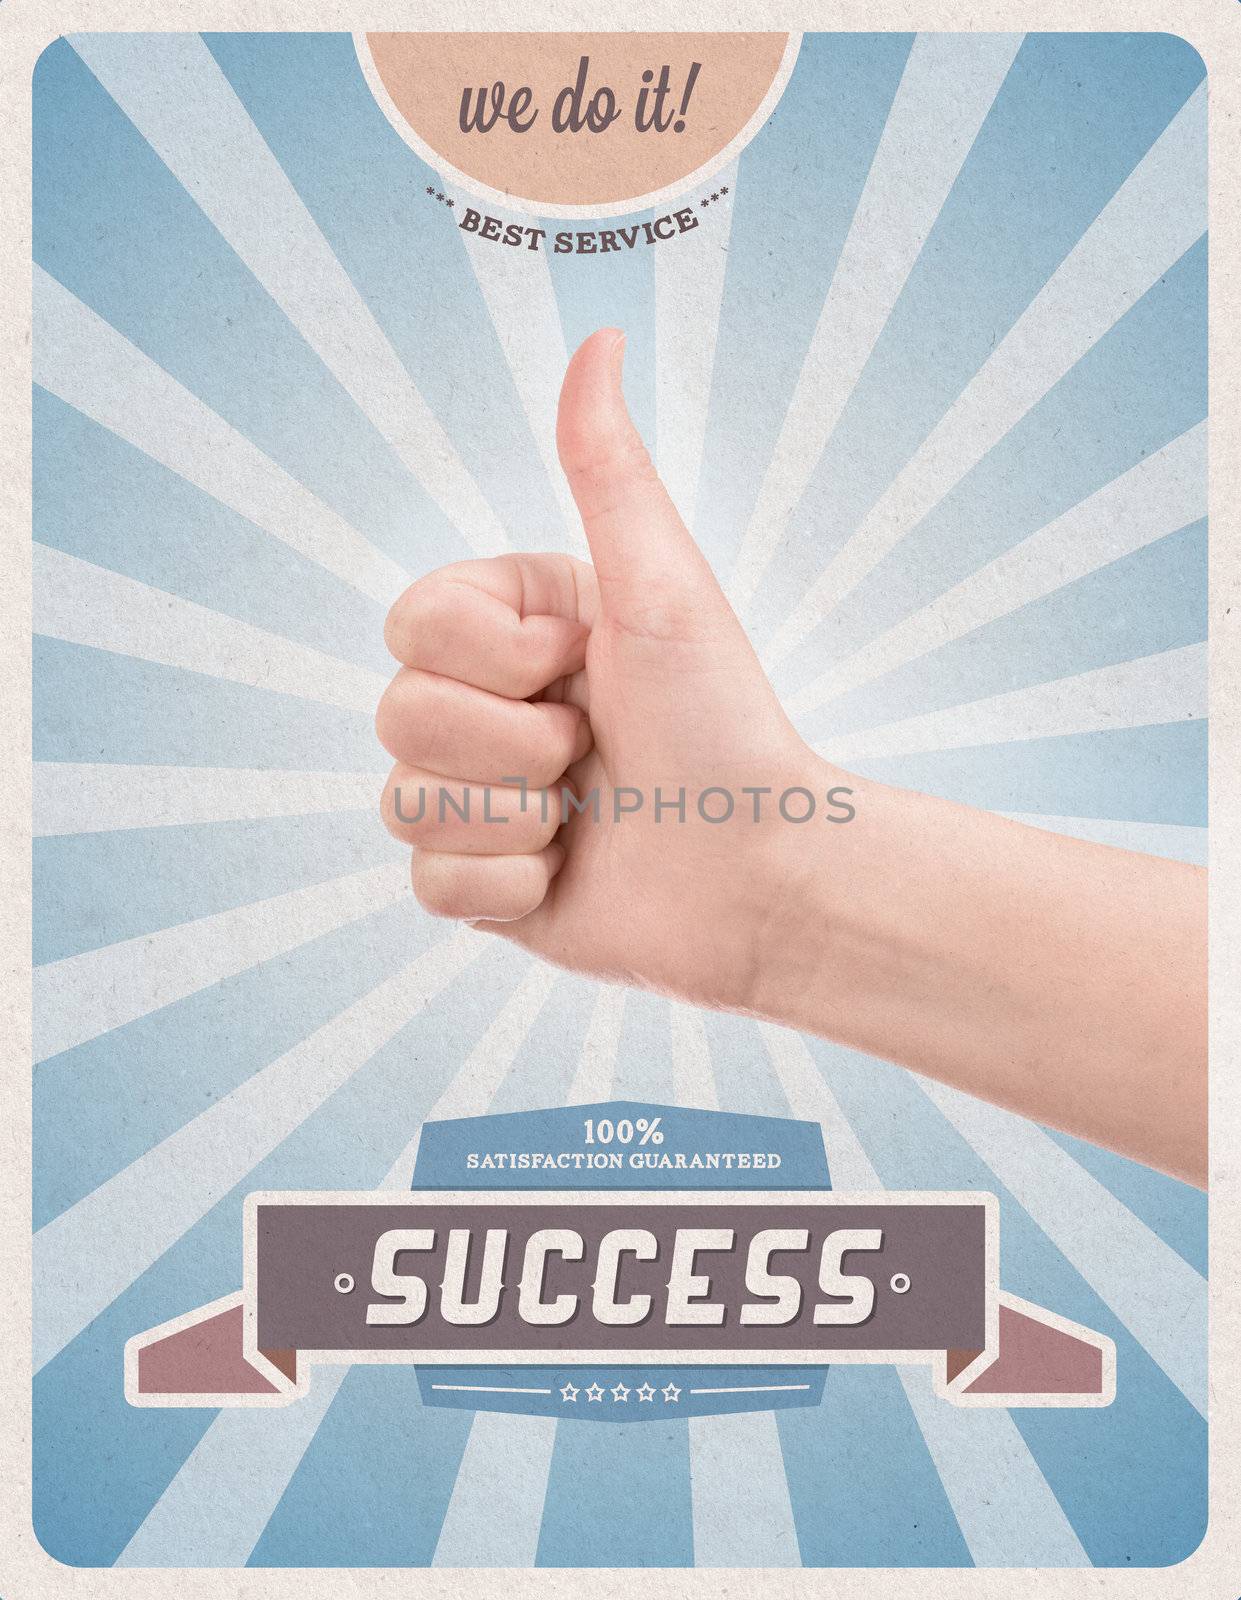 Retro or vintage advertising poster with hand giving a thumbs up gesture promising of best service, satisfaction guarantee and 100% success